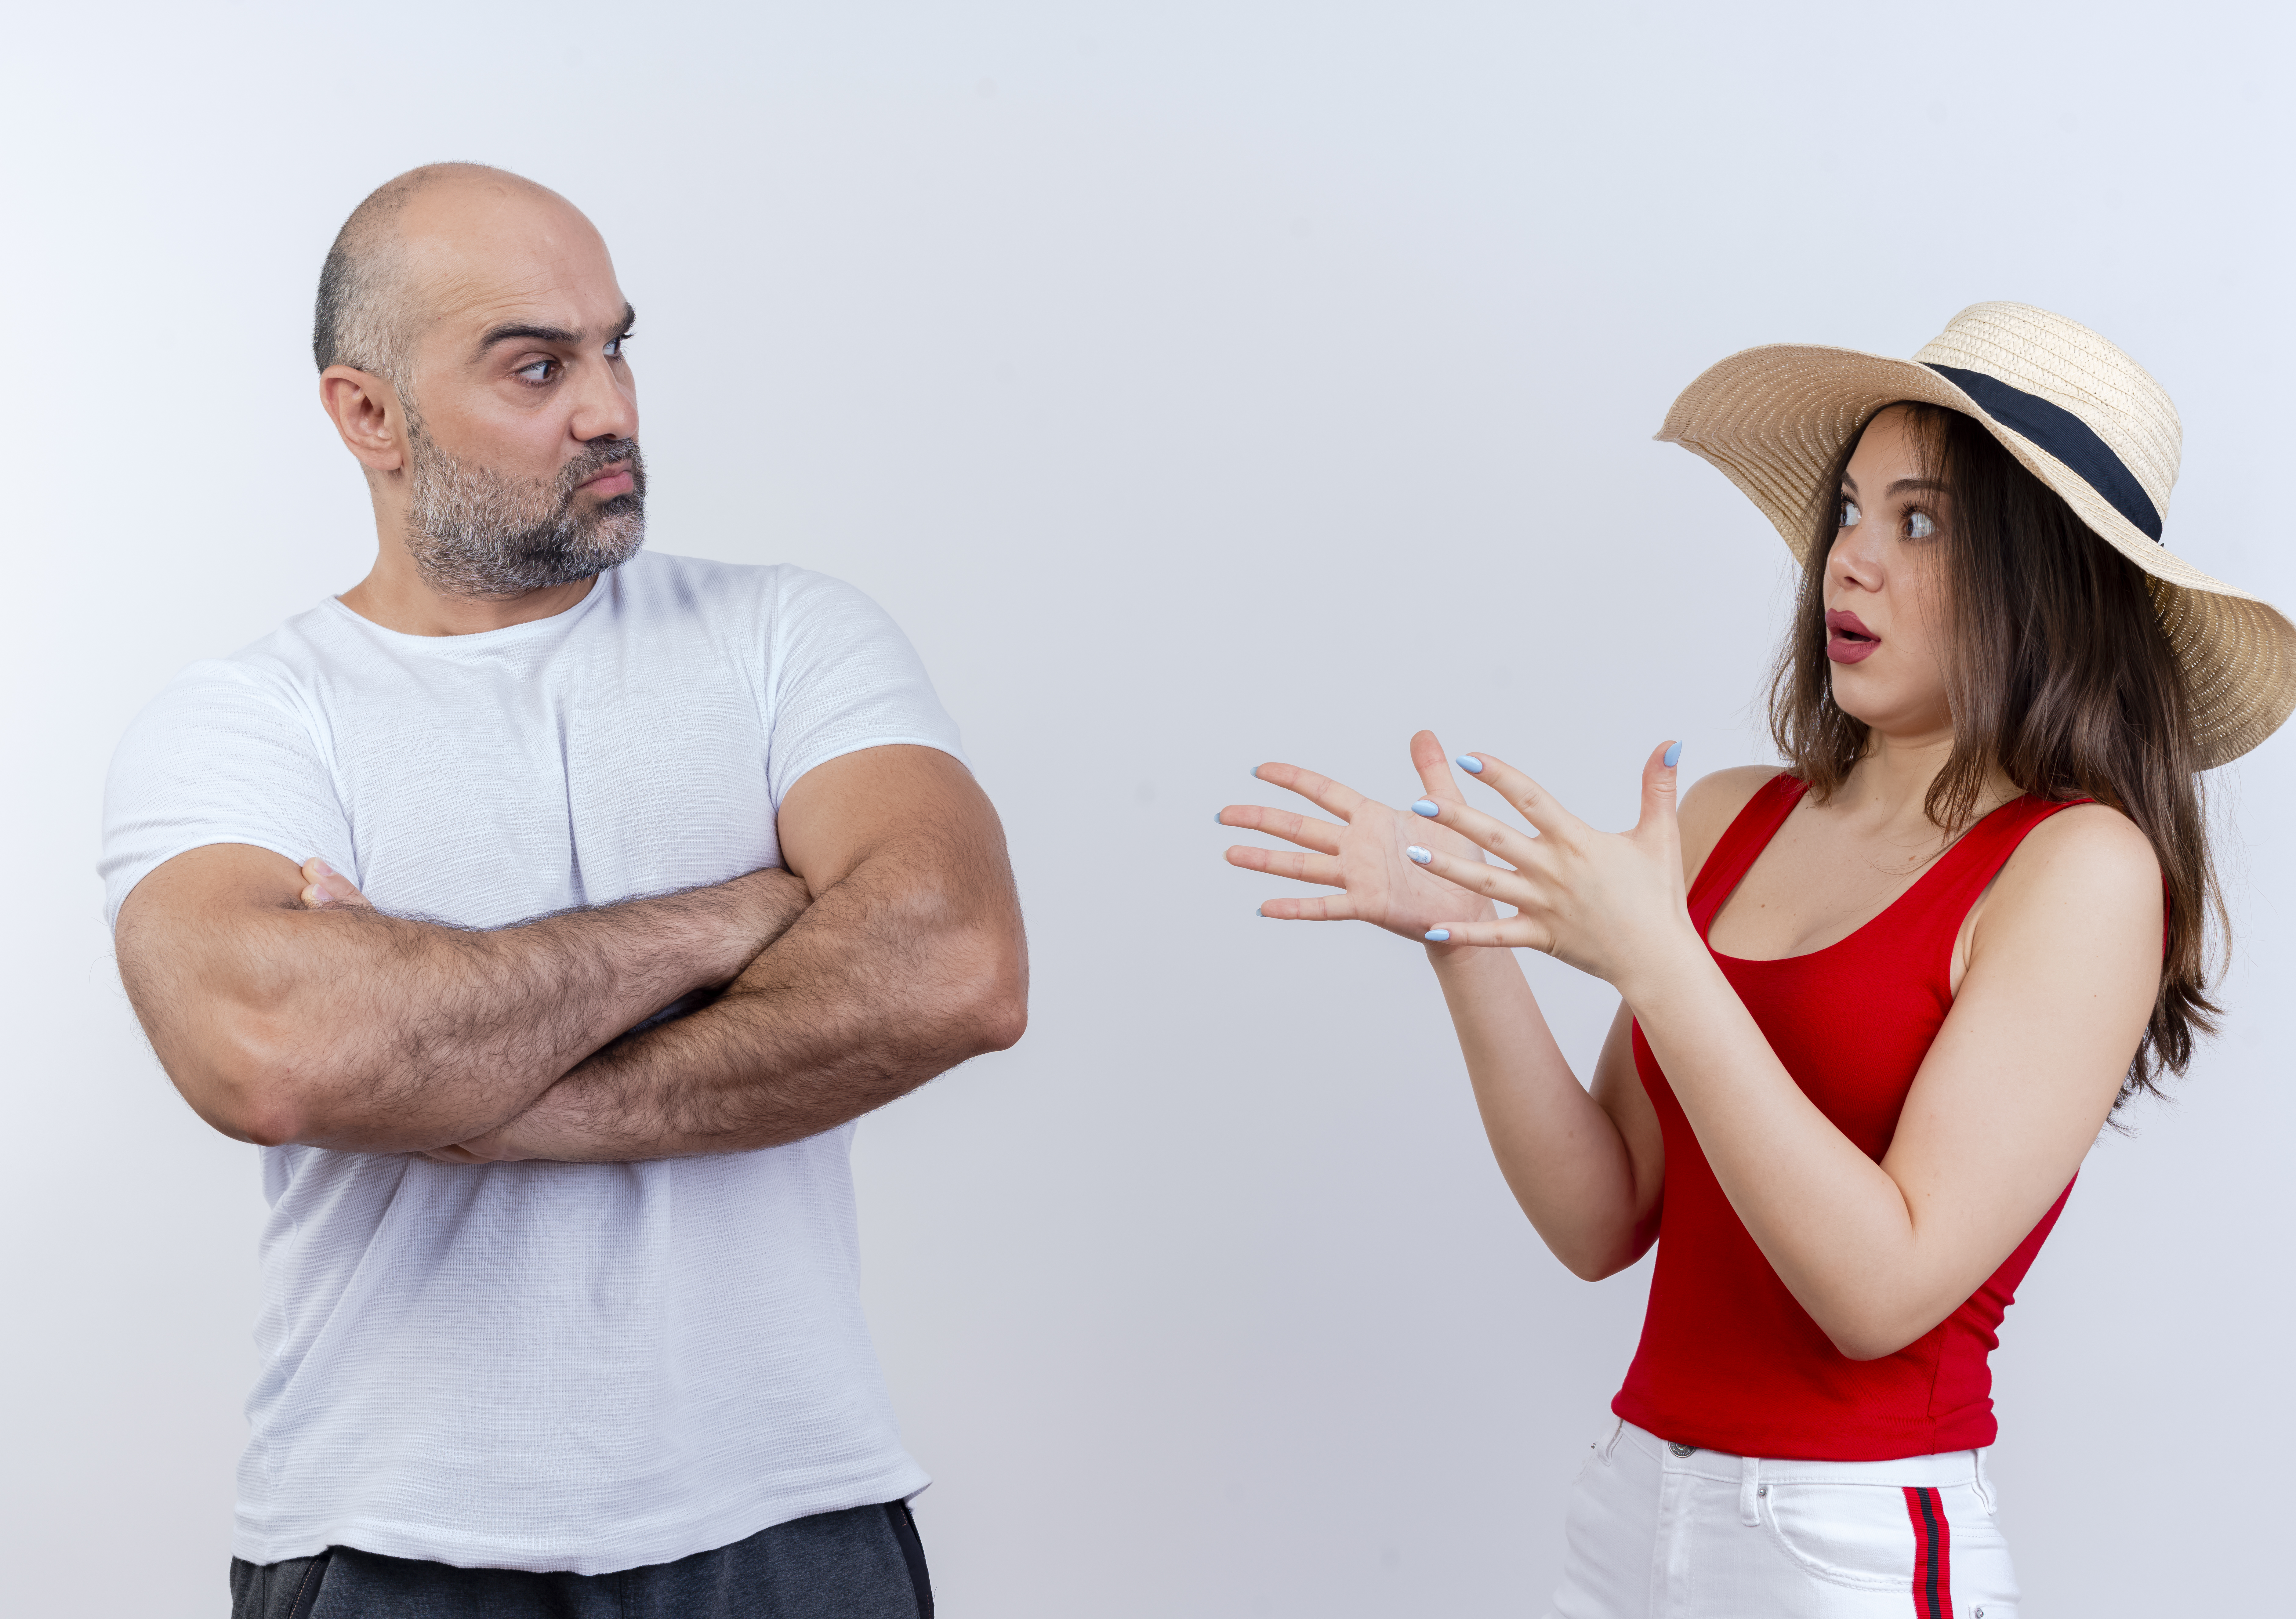 Man showing disapproval to woman wearing a red top and hat | Source: Freepik